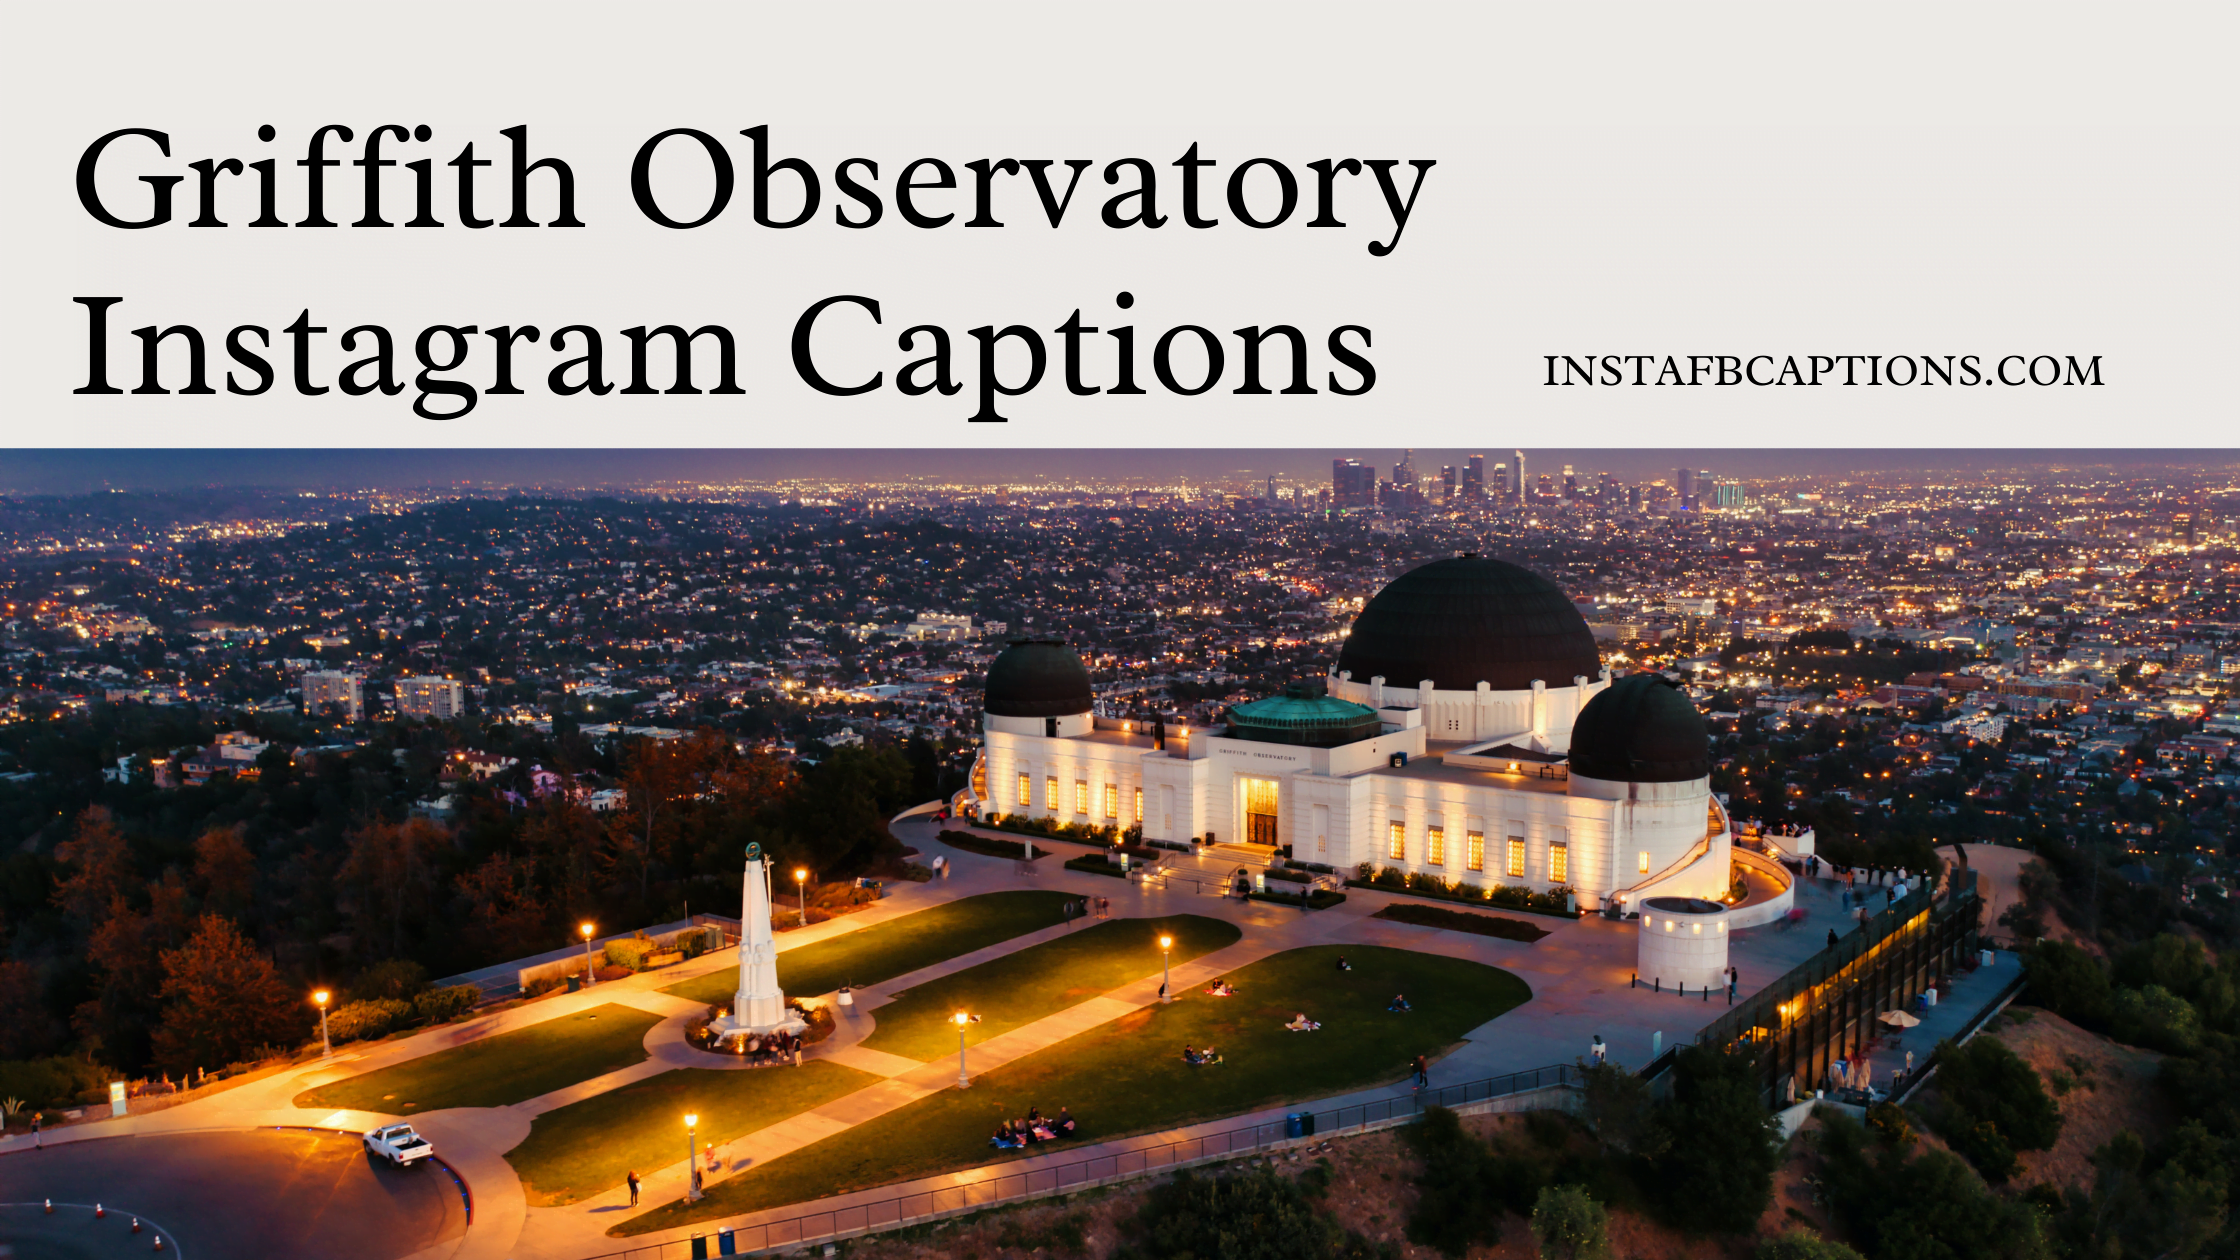 Griffith Observatory Instagram Captions  - Griffith Observatory Instagram Captions - 101 Griffith Observatory Instagram Captions Quotes Hashtags 2022